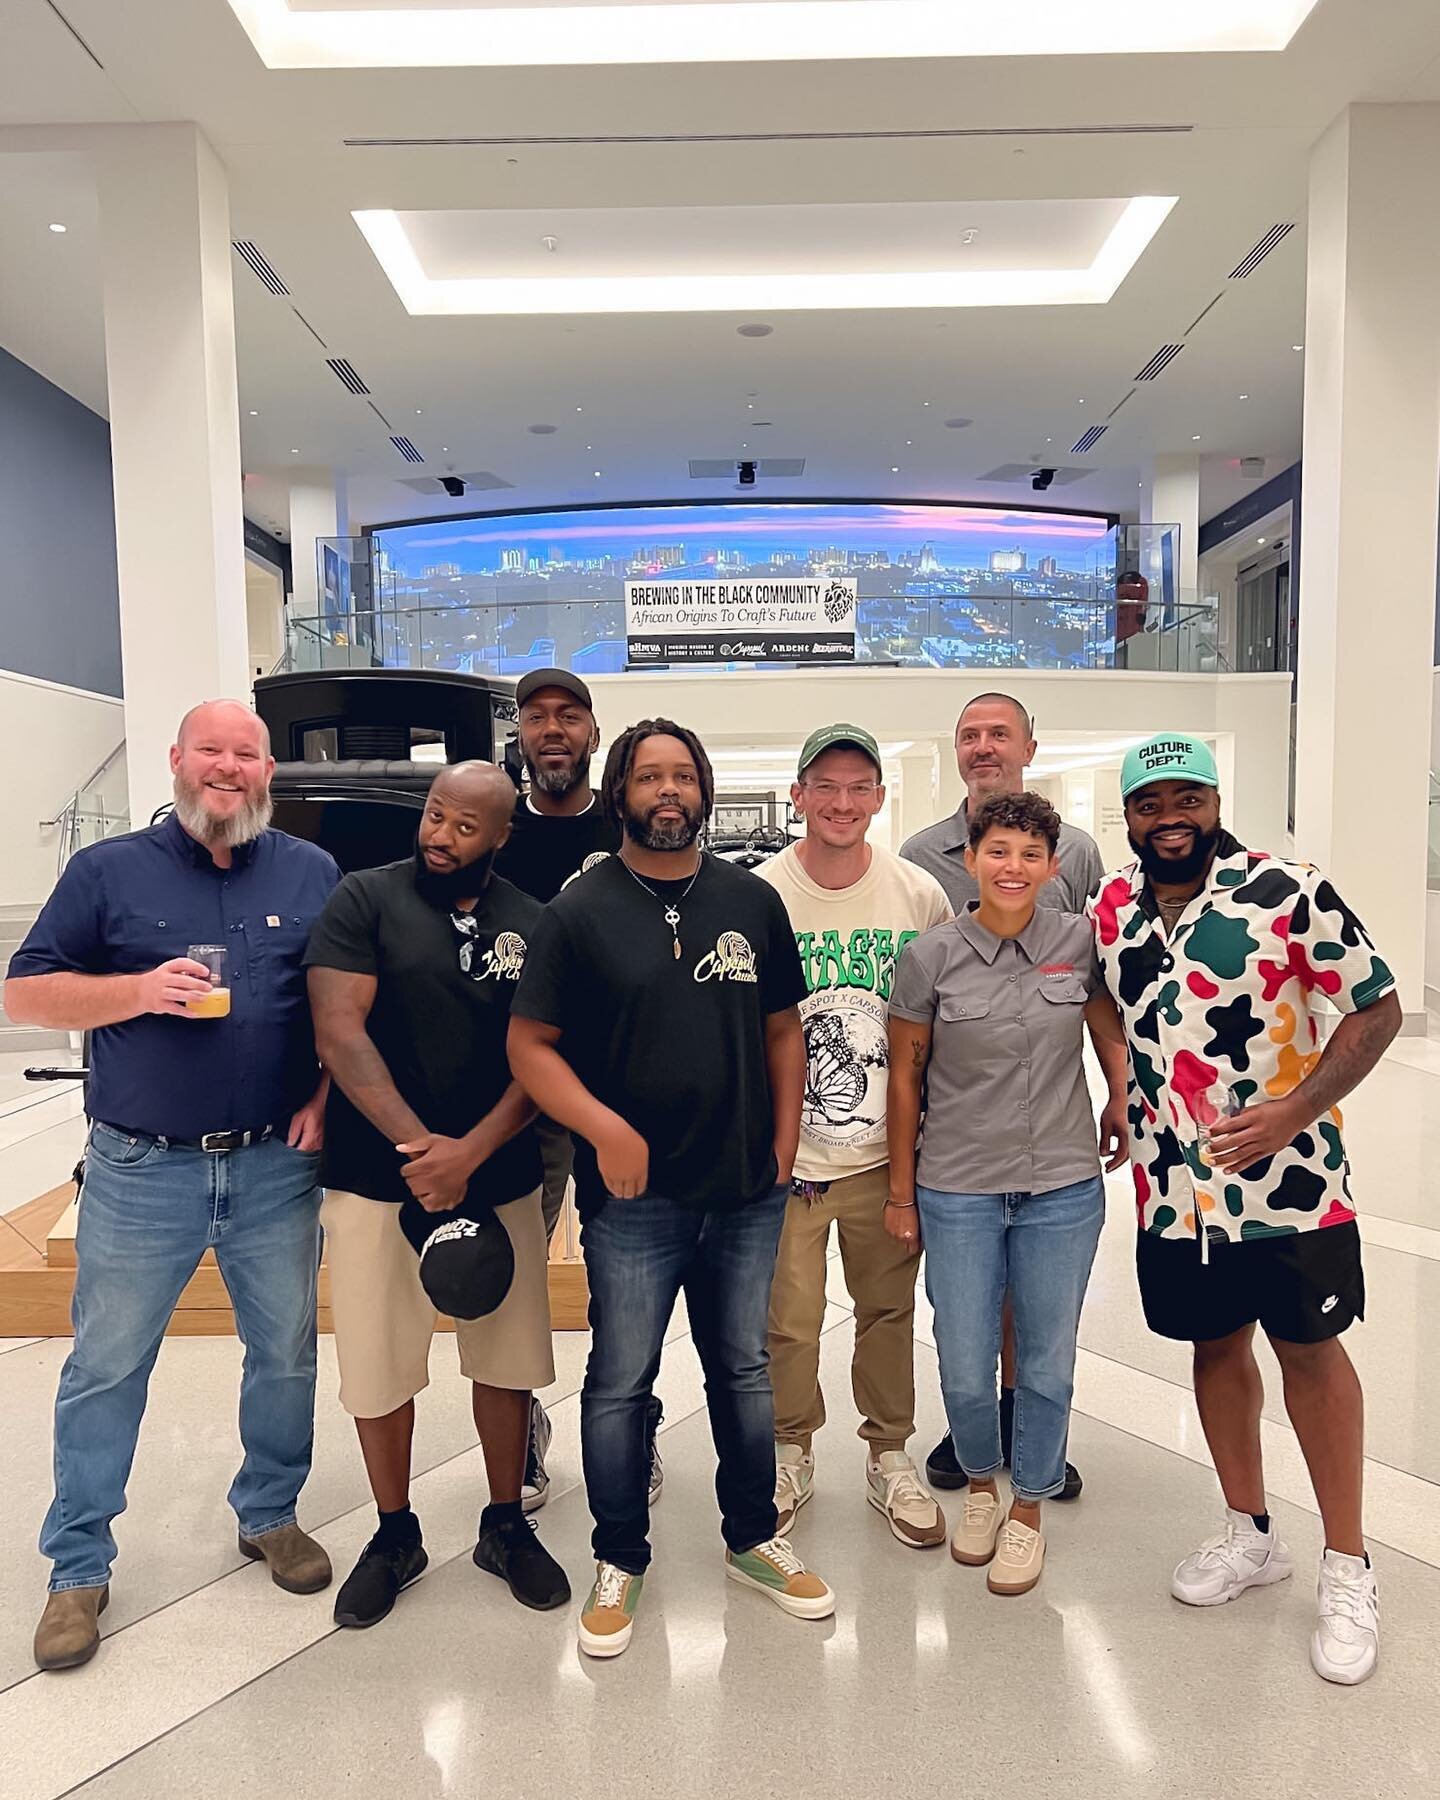 Here&rsquo;s to the final day of #VACraftBeerMonth 🍻

This past Friday, we were honored to be part of an exciting event at the Virginia Museum of History &amp; Culture (@virginiahistory) - 'Brewing in the Black Community: African Origins to Craft&rs